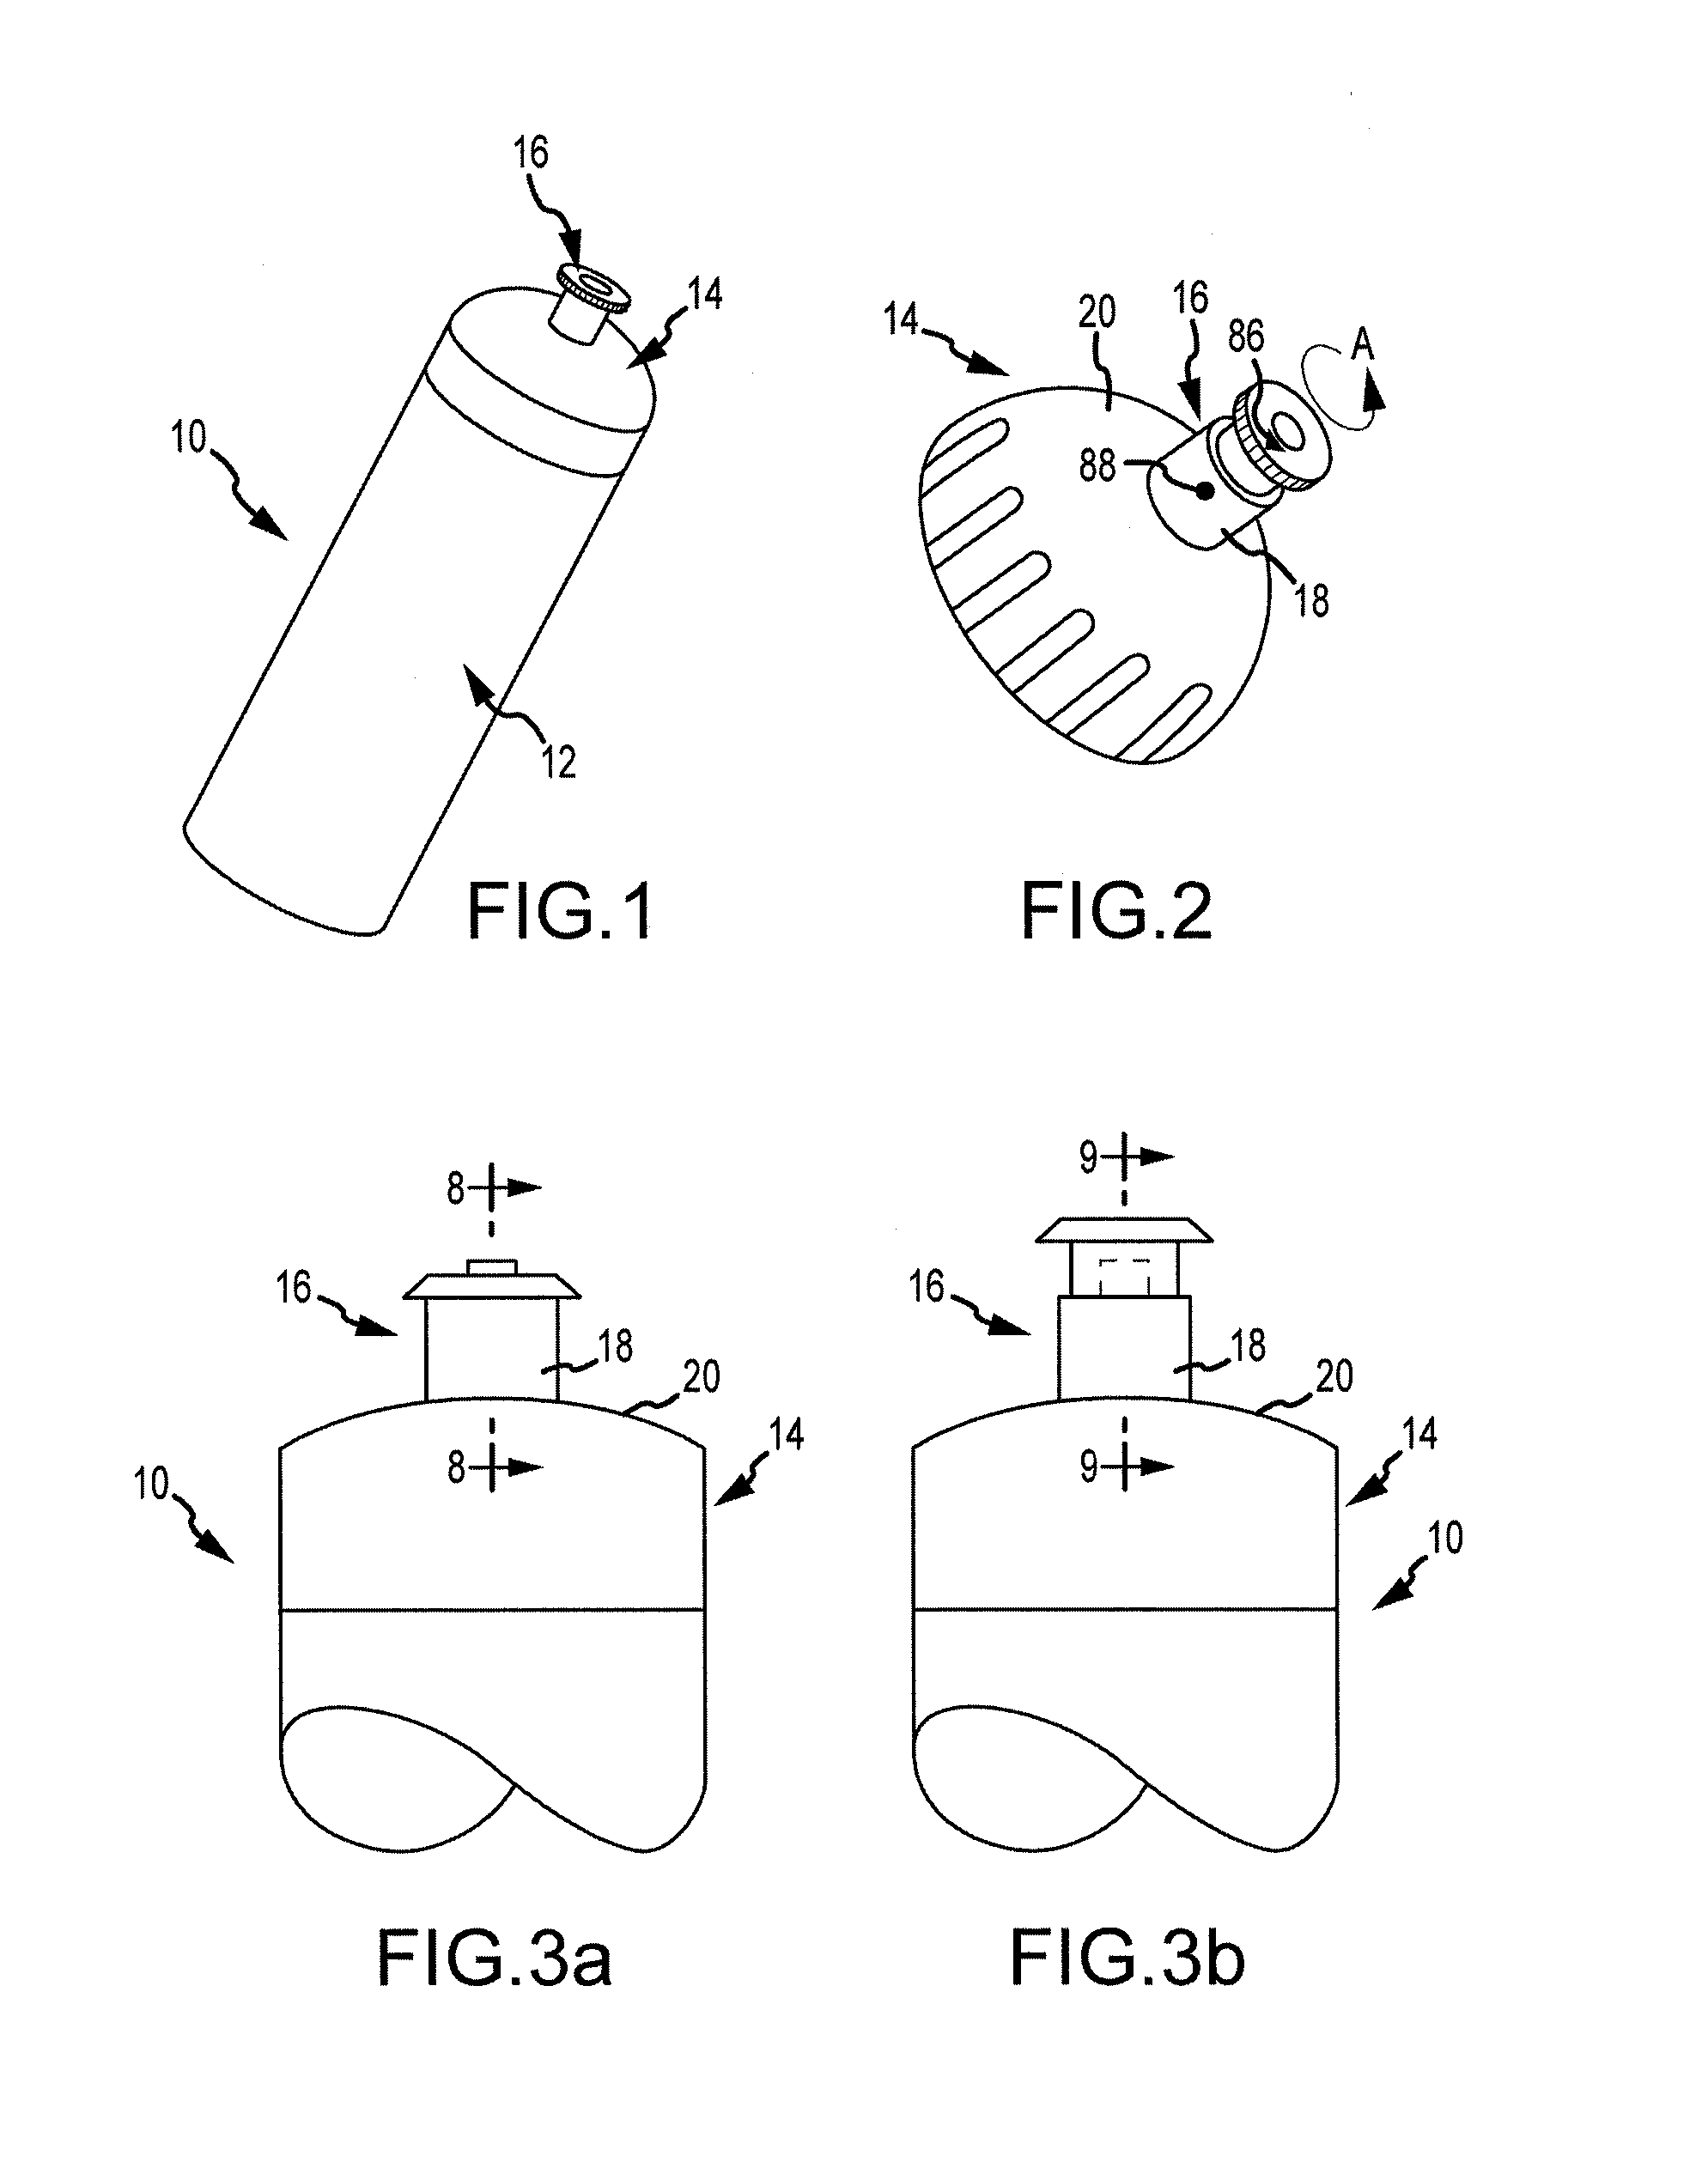 Fluid container closure mechanism with detachable valve assembly